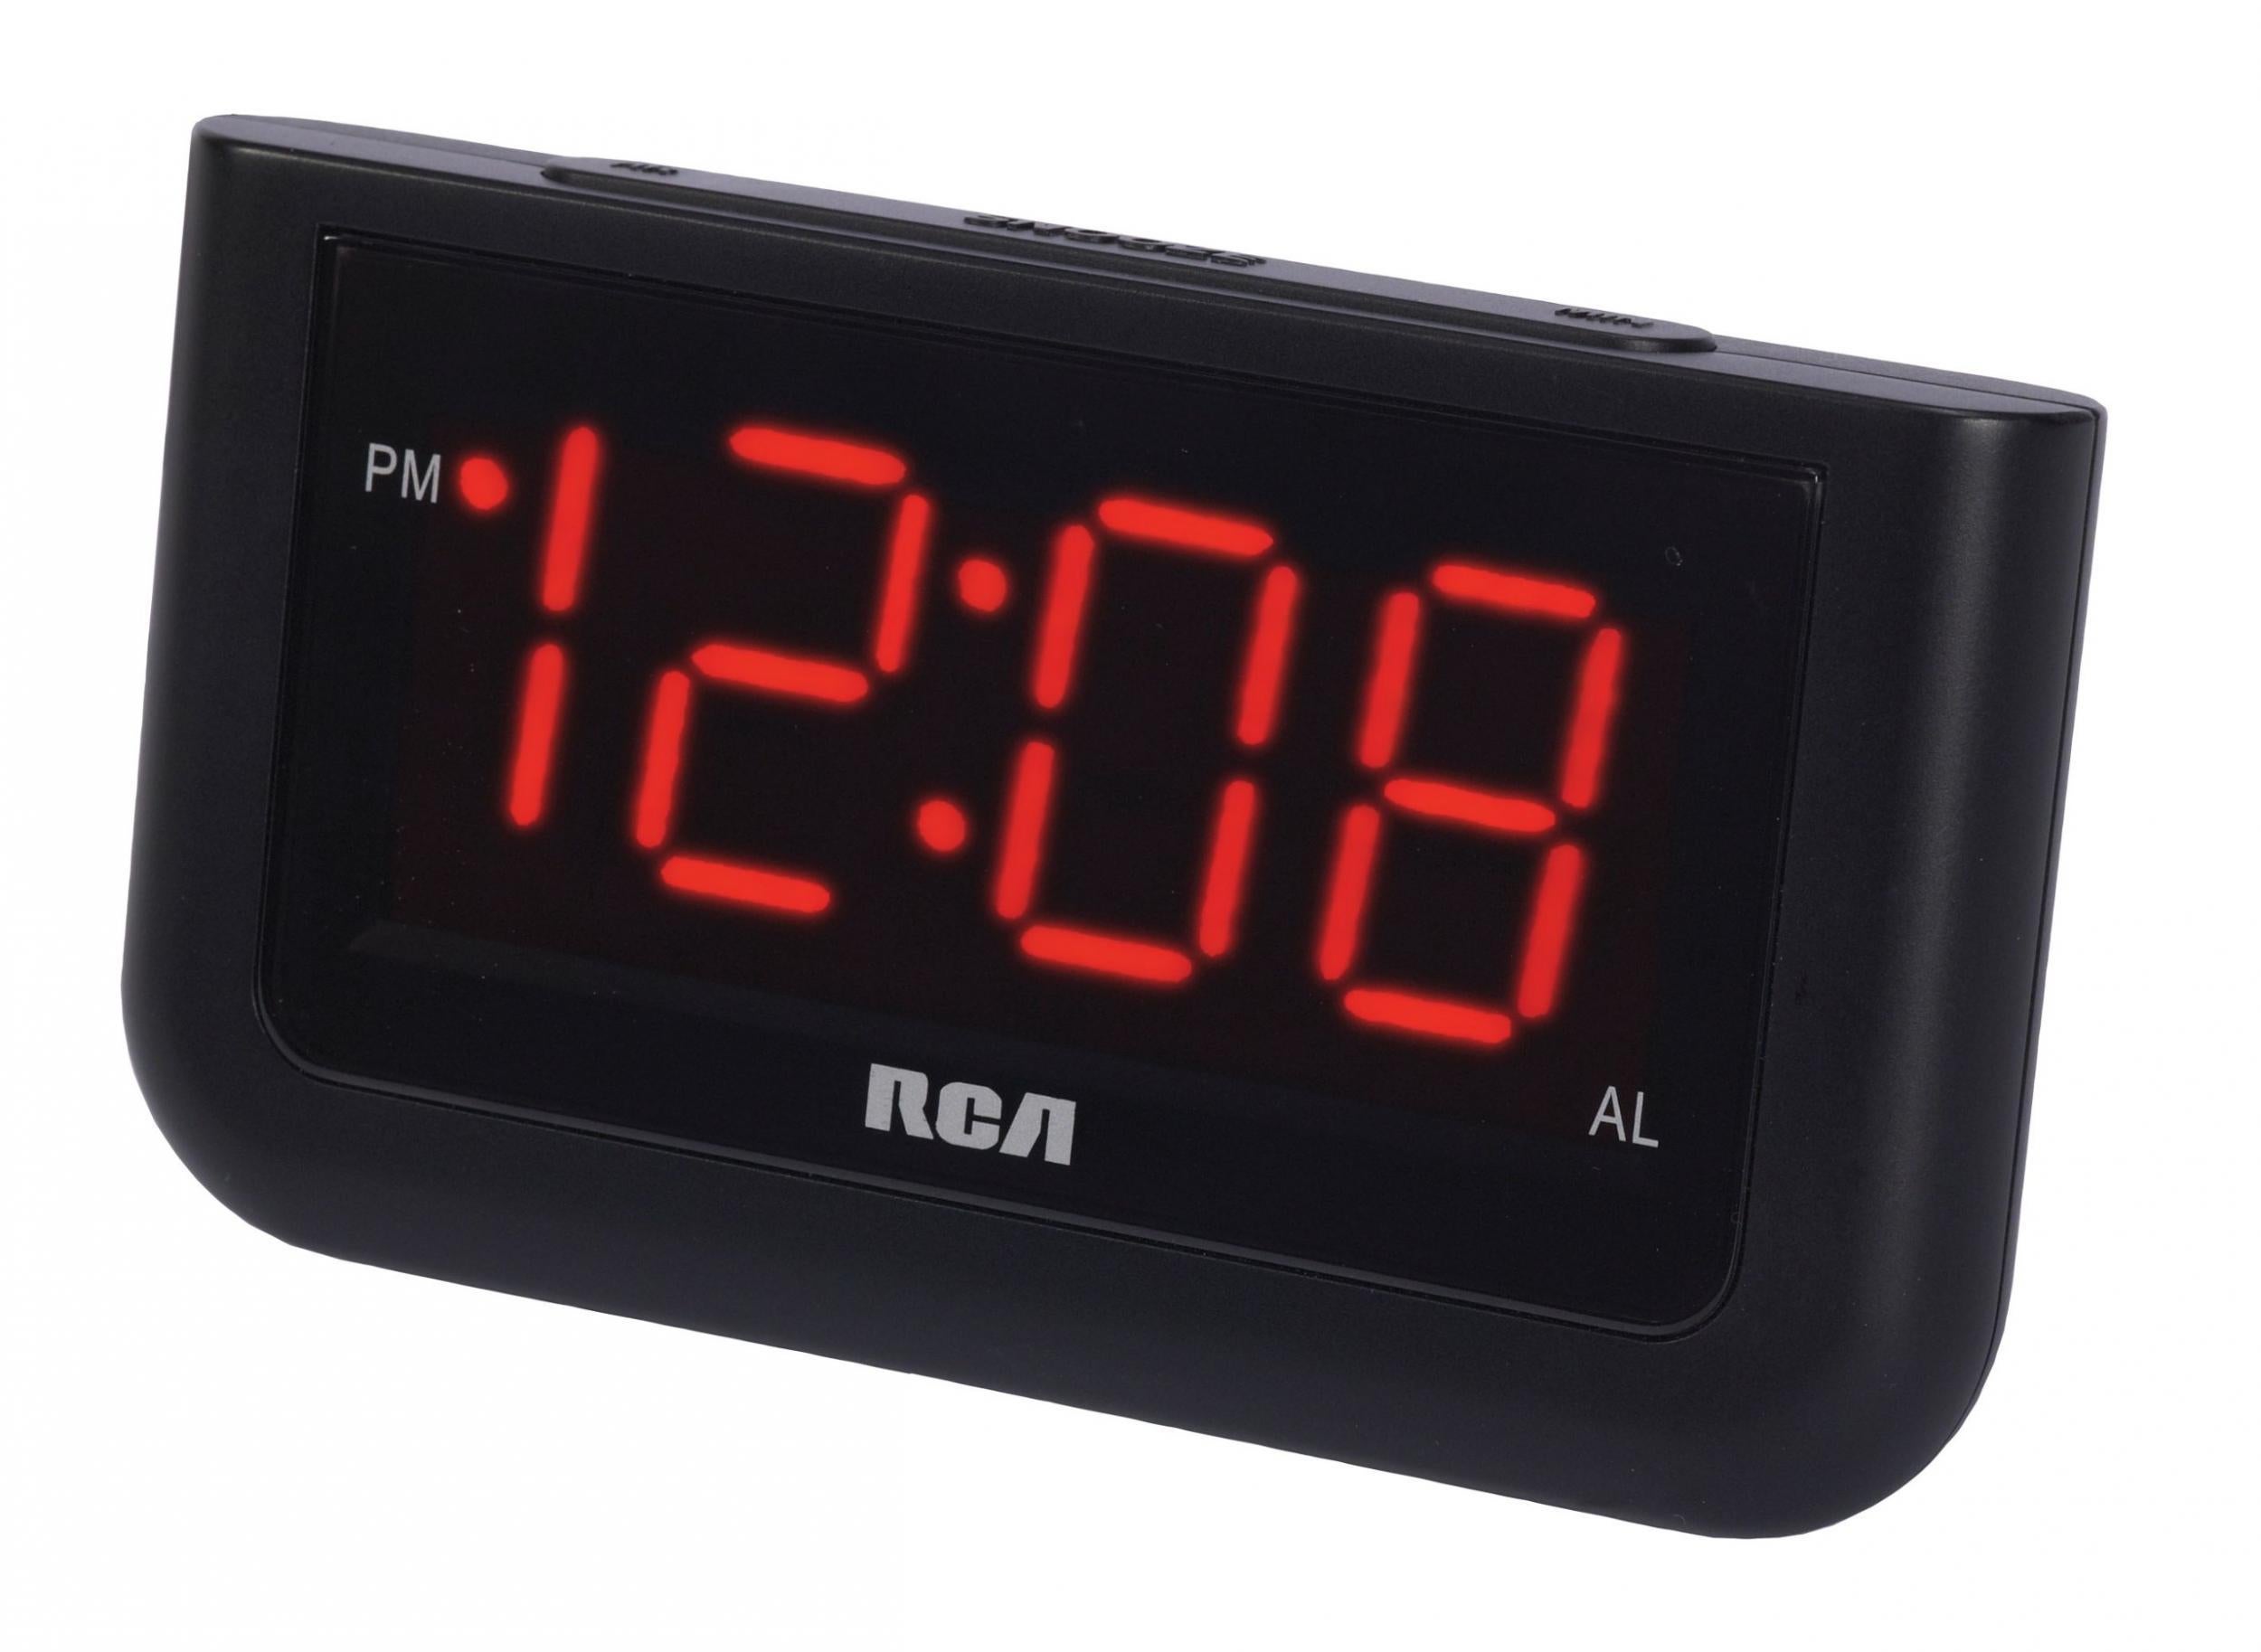 Mains Powered or Battery Operated Black Snooze Big White Digit Display Bedside Silent Wooden Clock with Multiple Alarm and 5 Level Brightness Non Ticking GINZER LED Digital Alarm Clock 